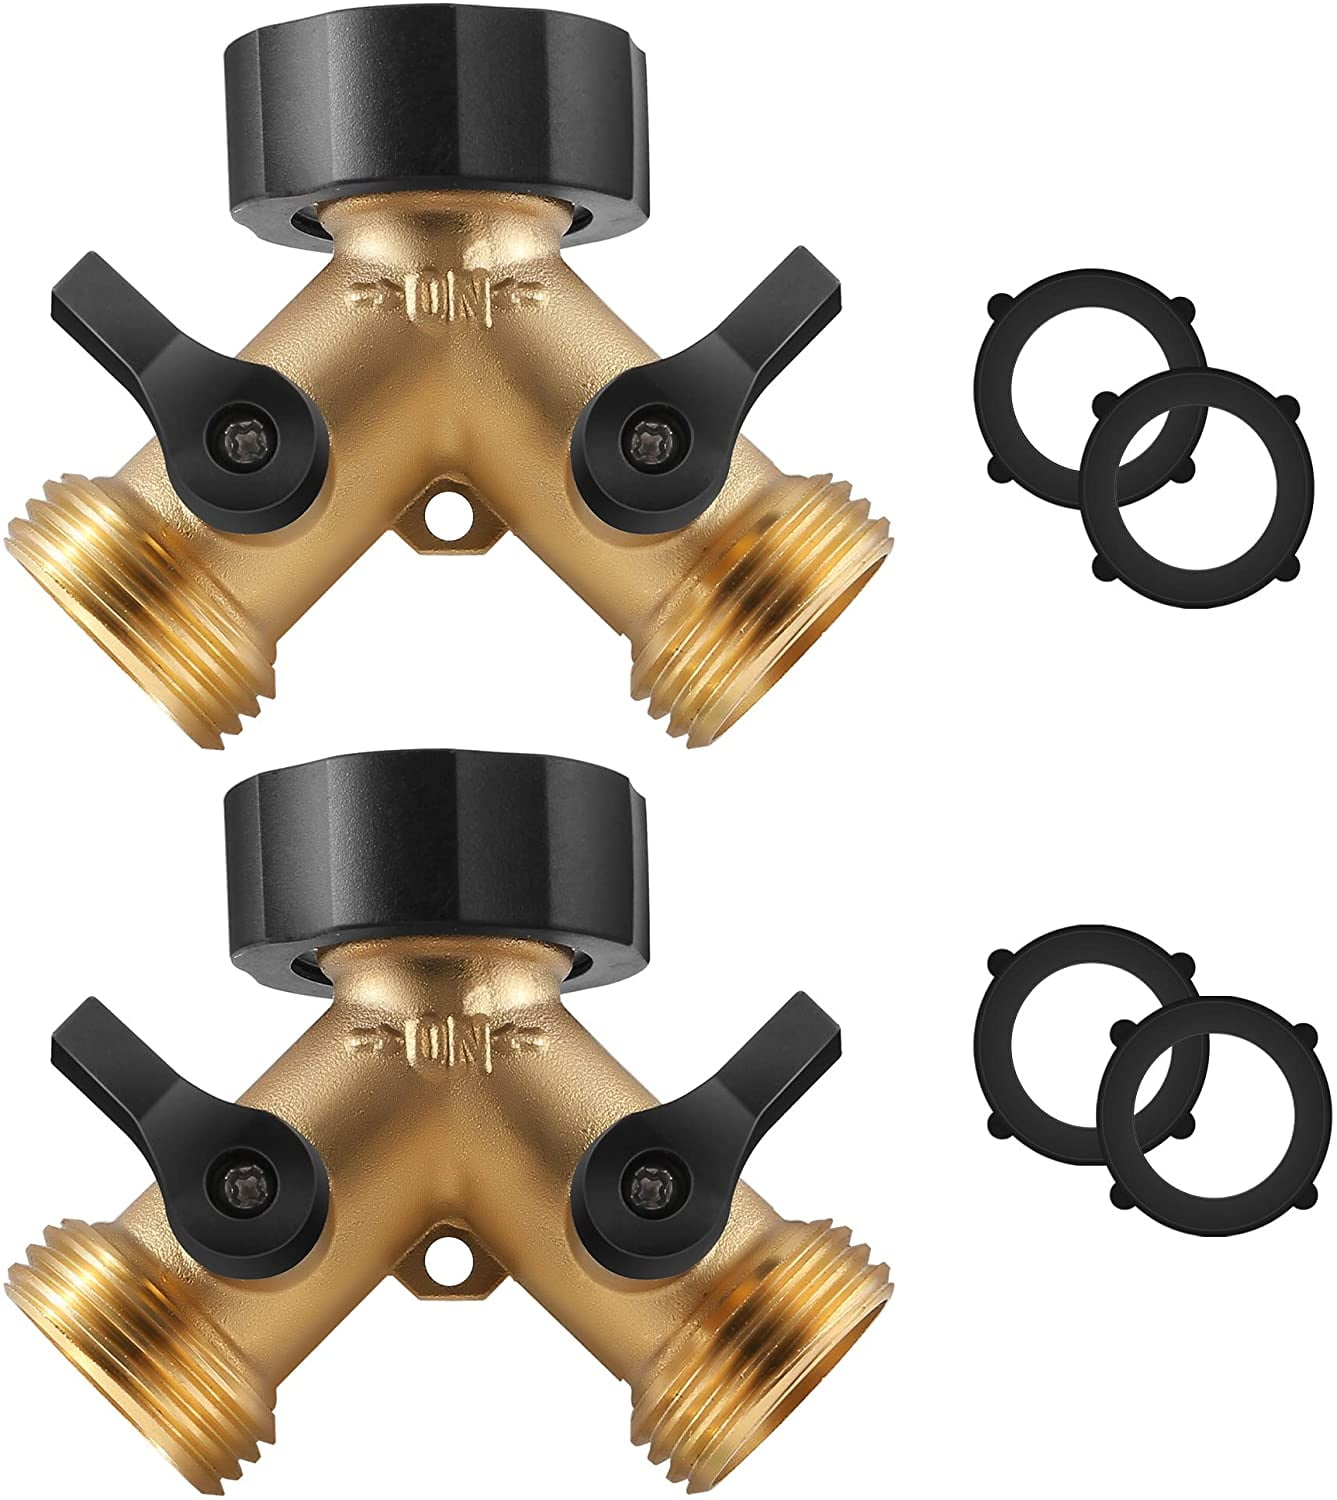 KING DO WAY 3/4 Brass 2 WAY Double Outside Tap Adaptor Garden Irrigation Hose Connectors